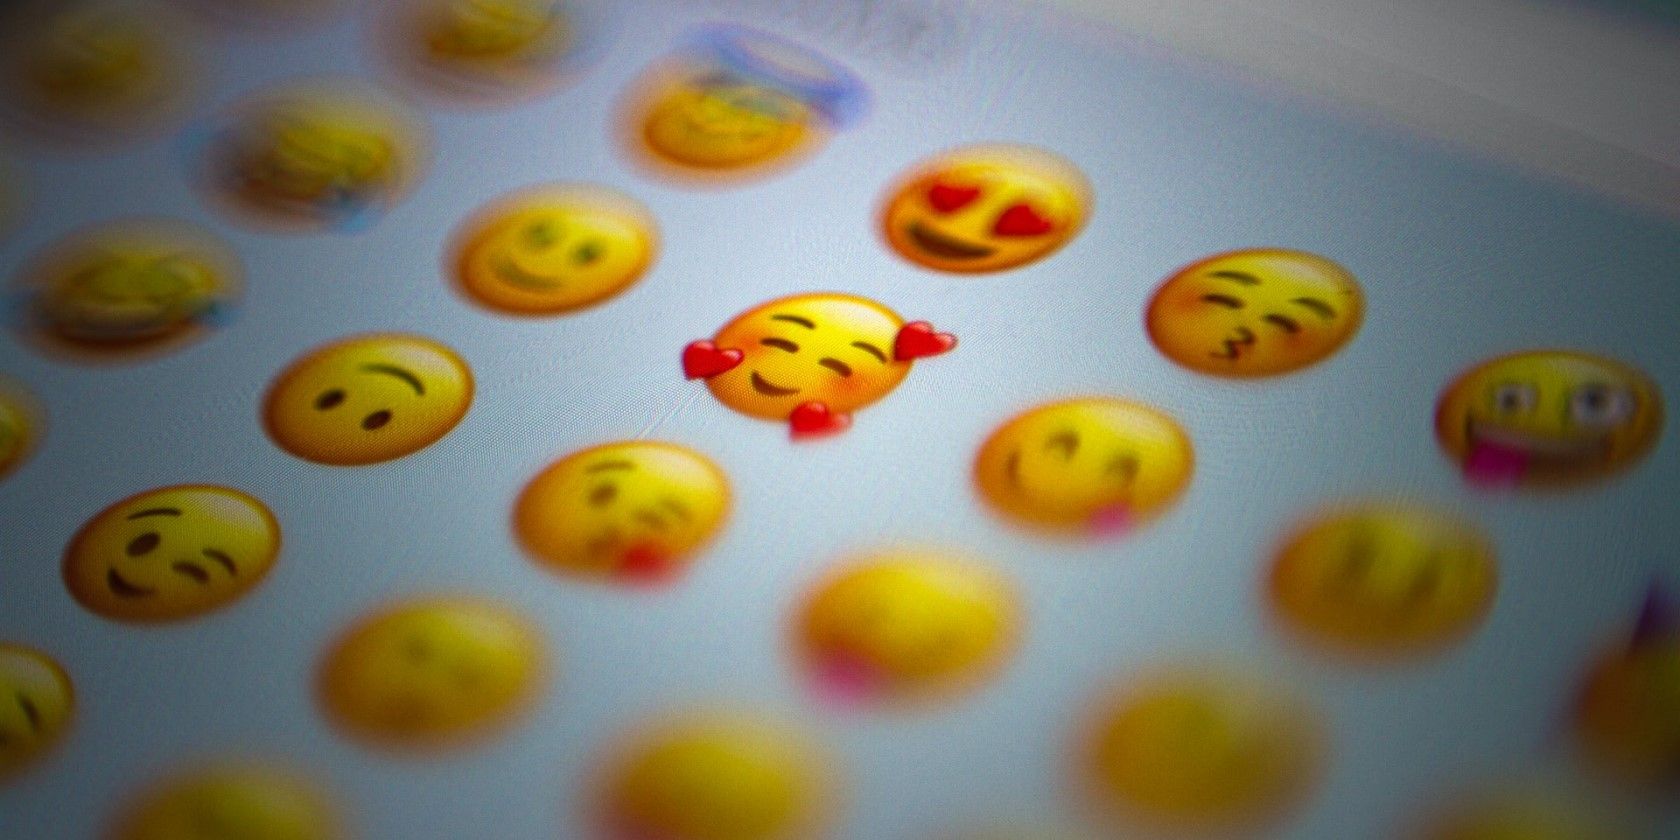 How to Make Your Own Emoji